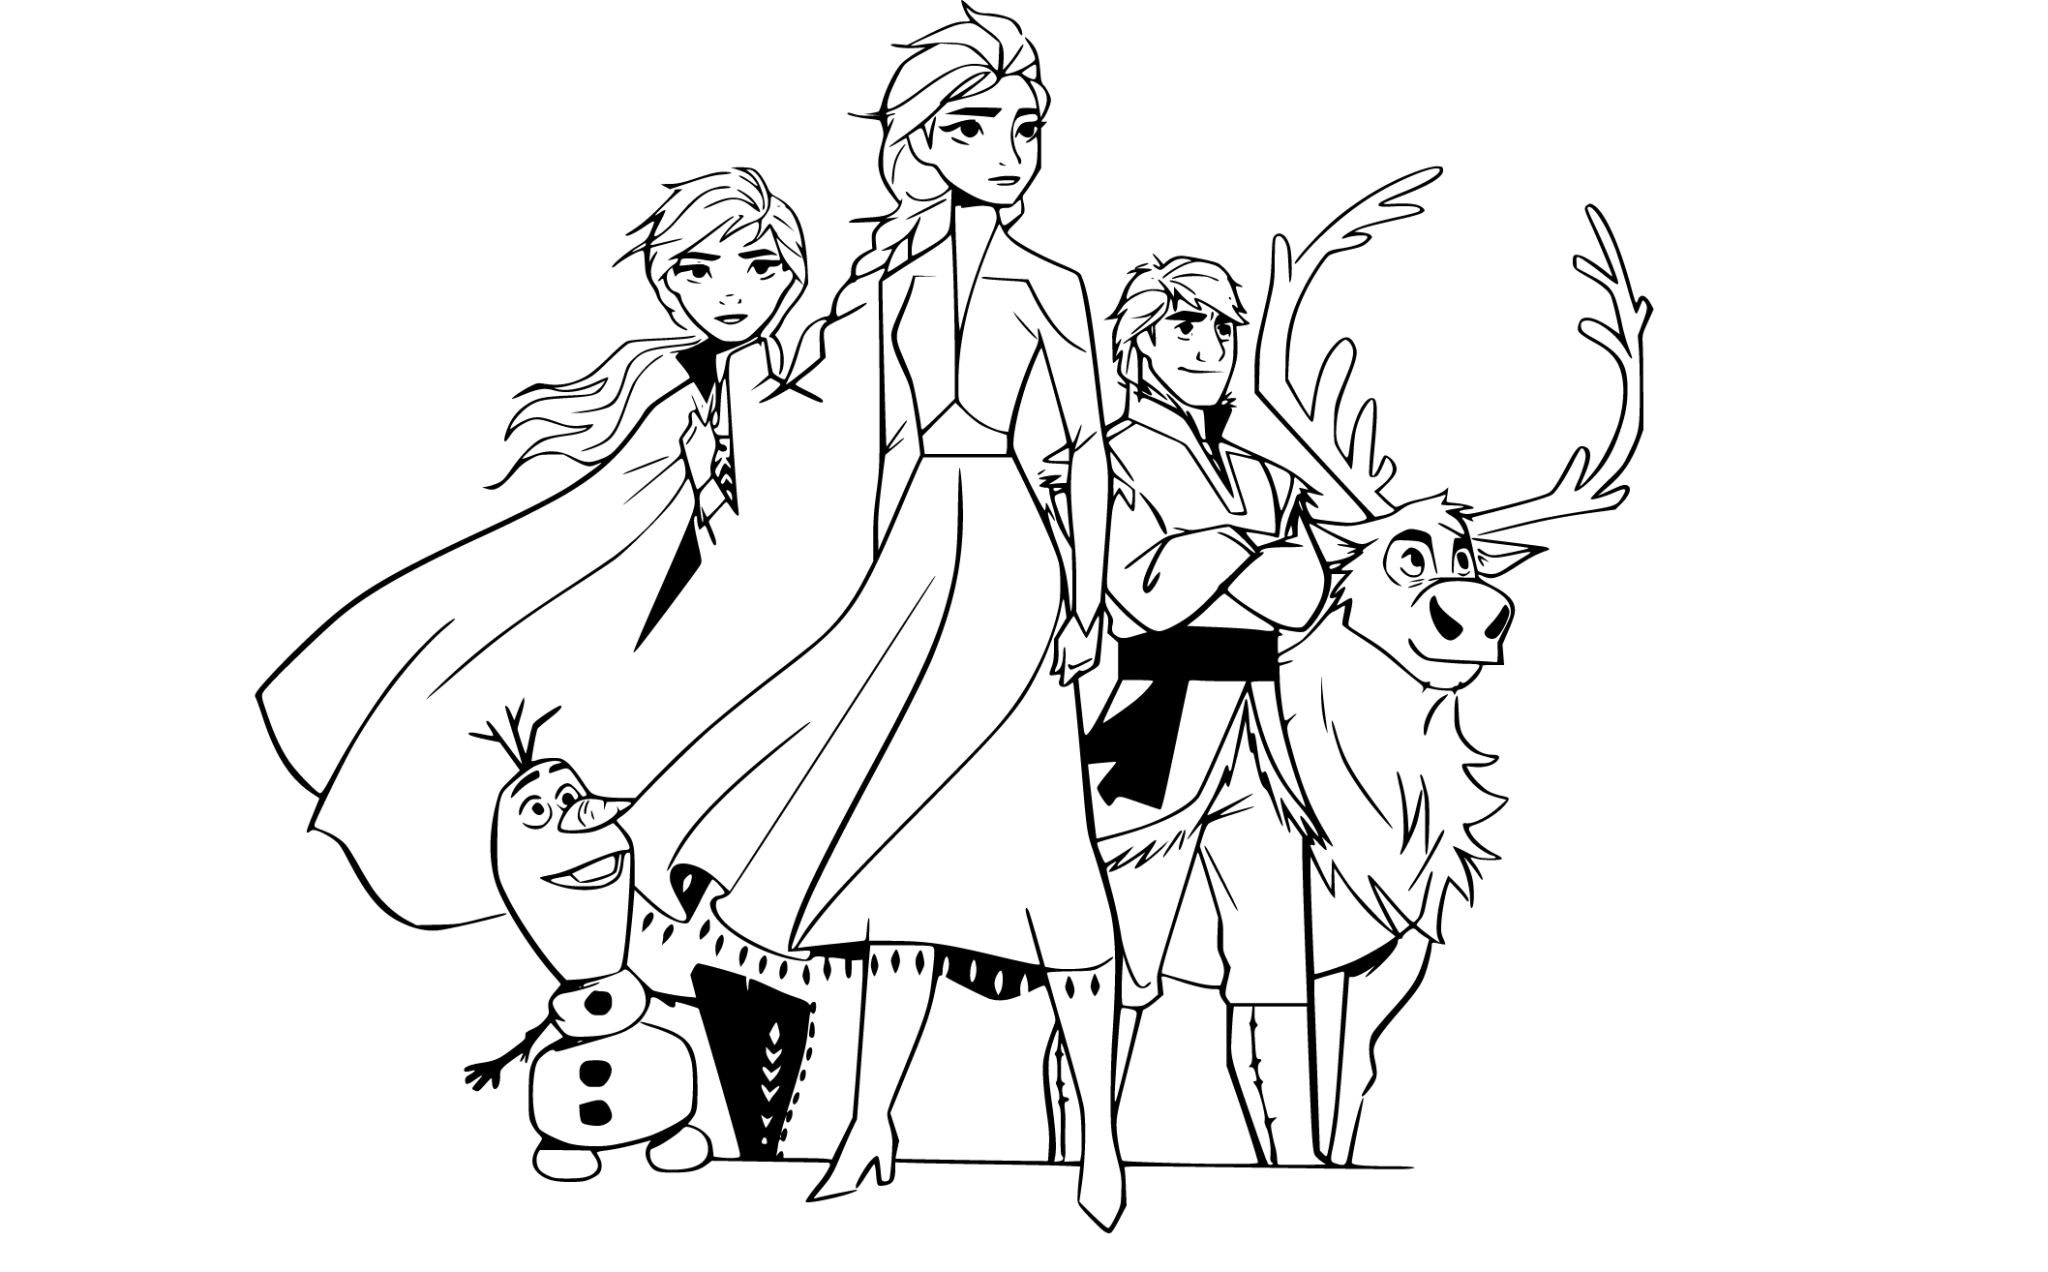 Bring the Magic of Frozen to Life with Free Coloring Pages